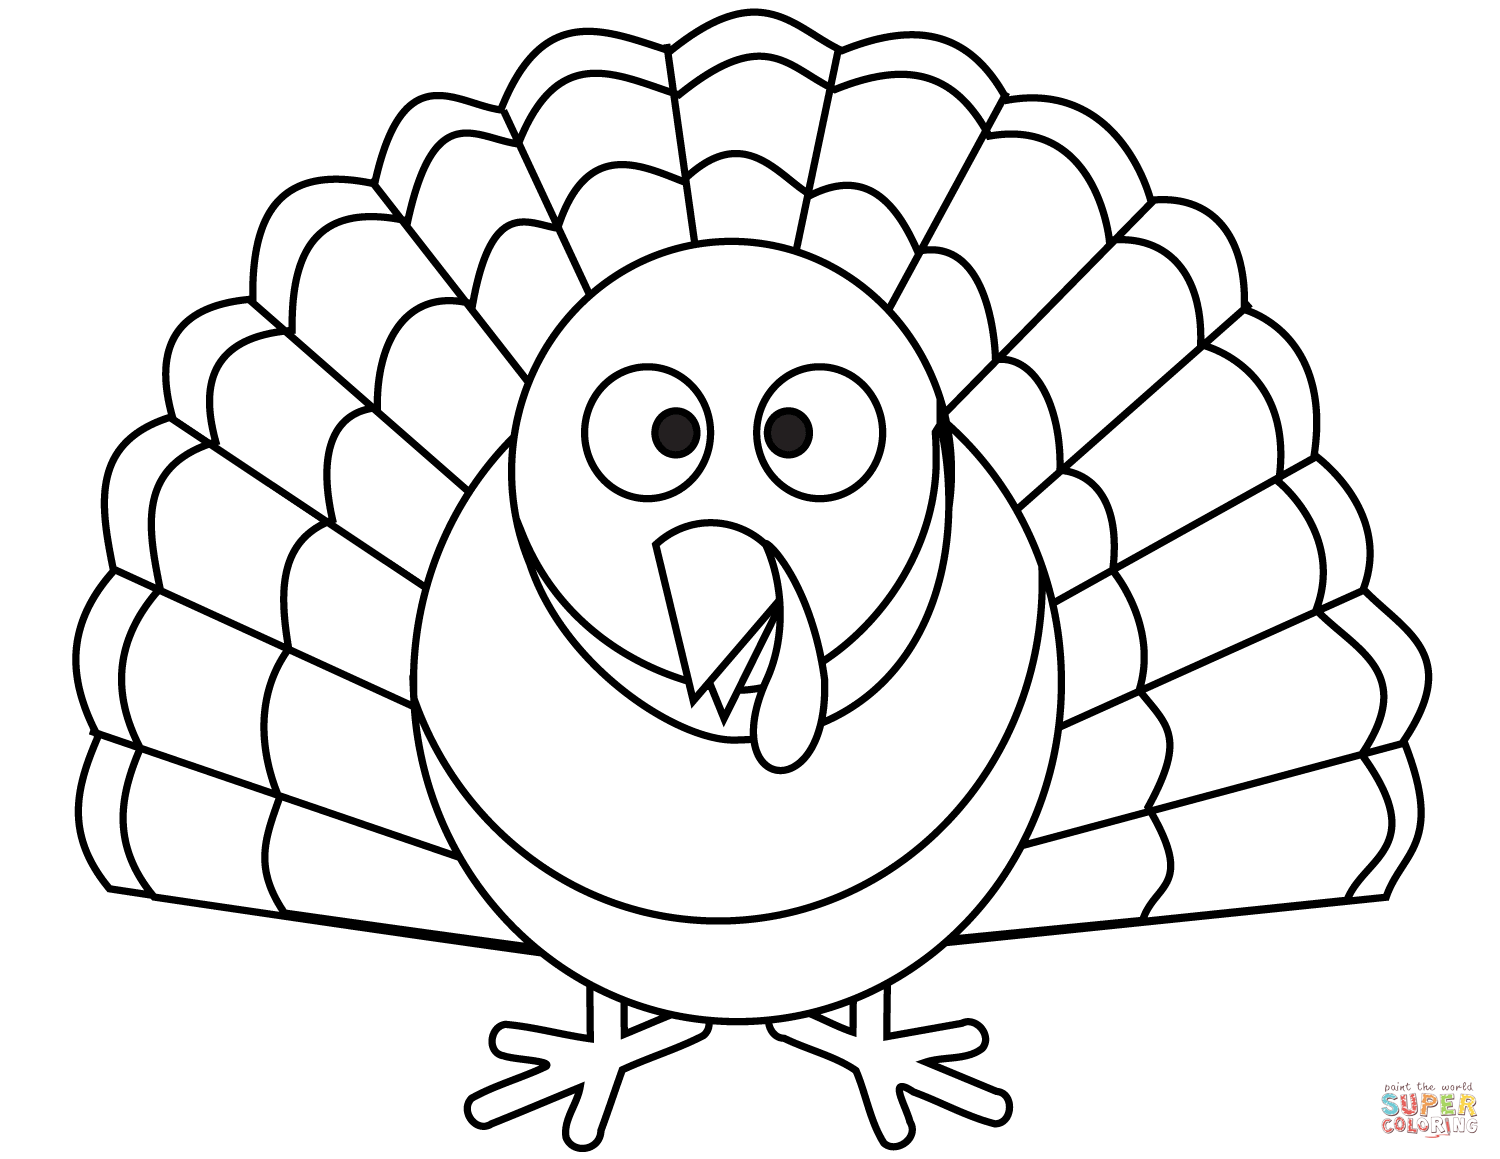 Cartoon turkey coloring page free printable coloring pages